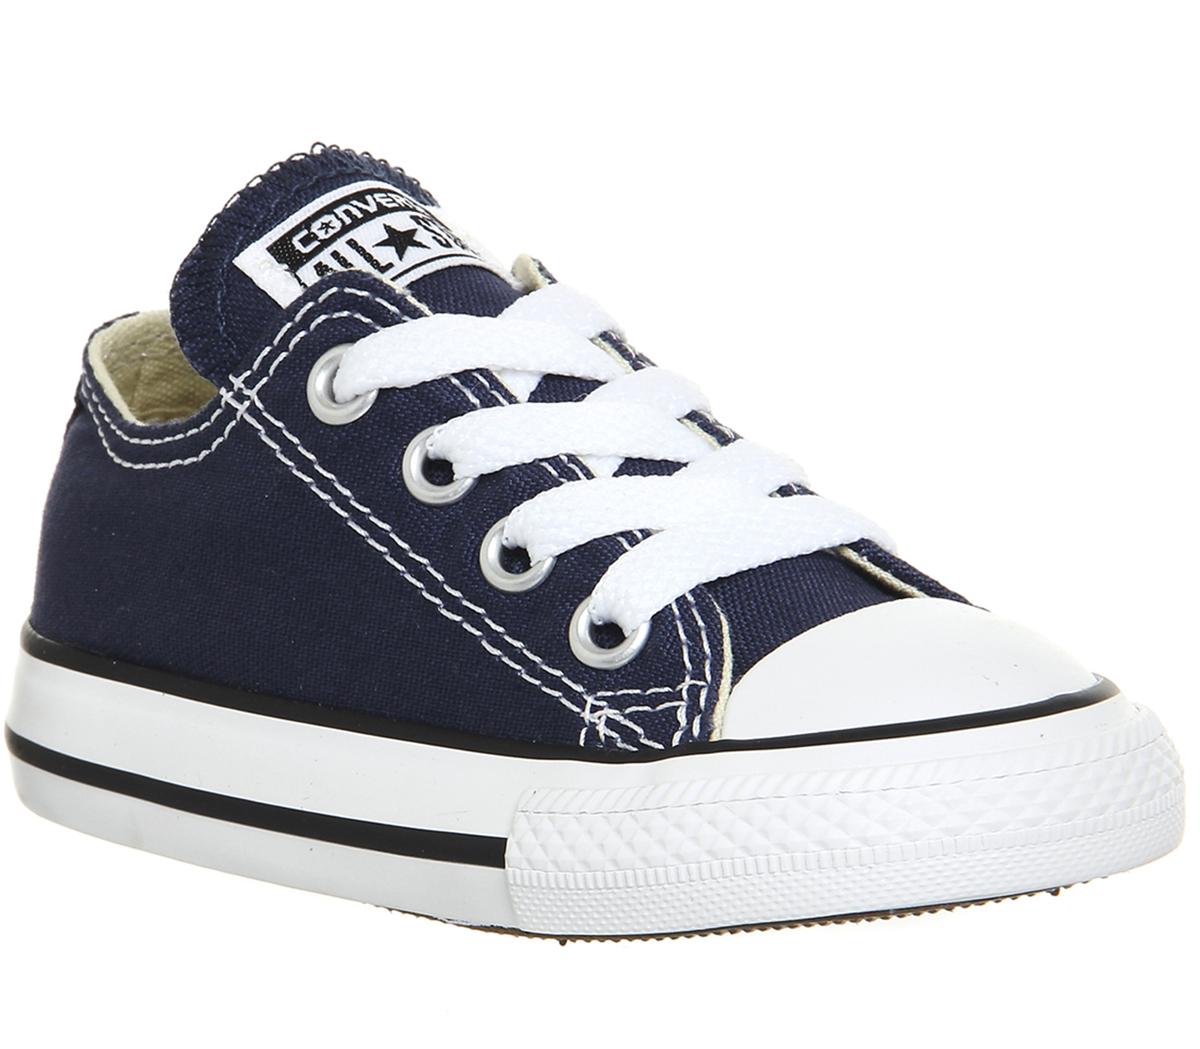 Converse All Star Low Infant Shoes Navy - Unisex